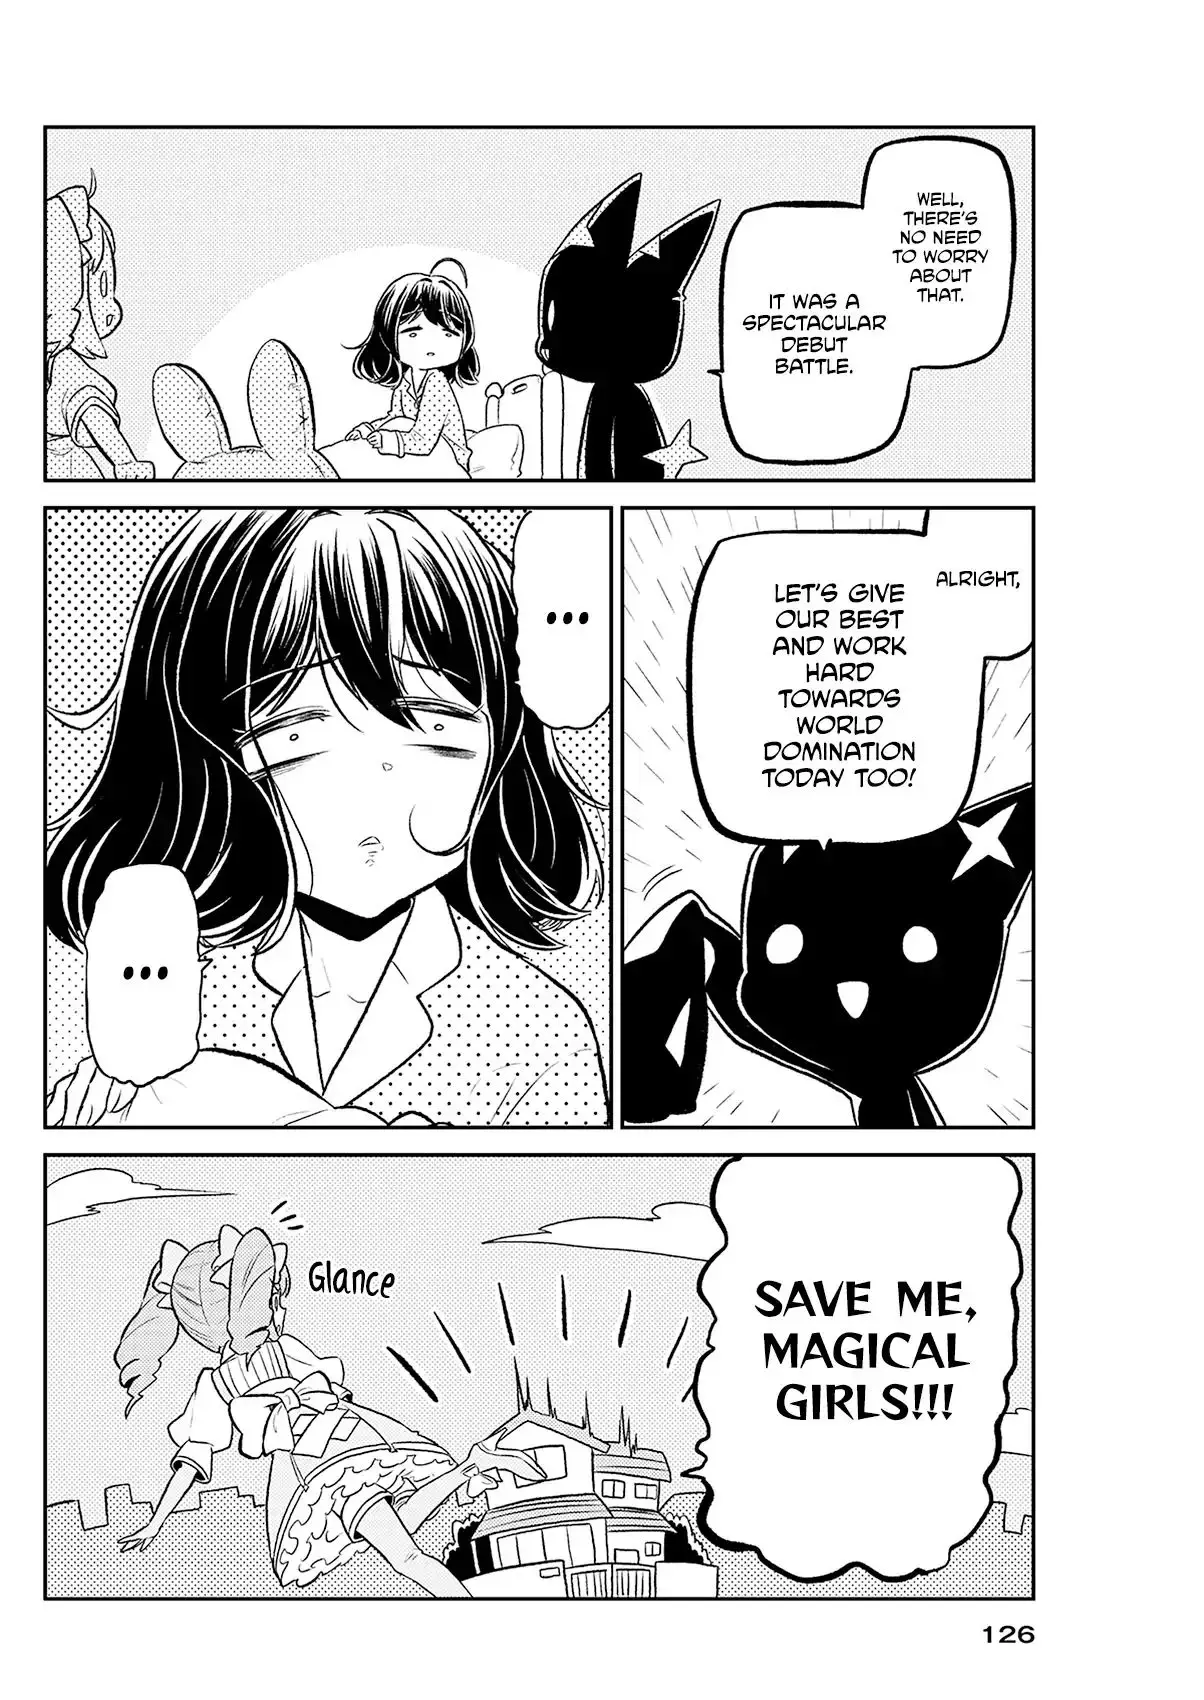 Looking Up To Magical Girls - 1 page 25